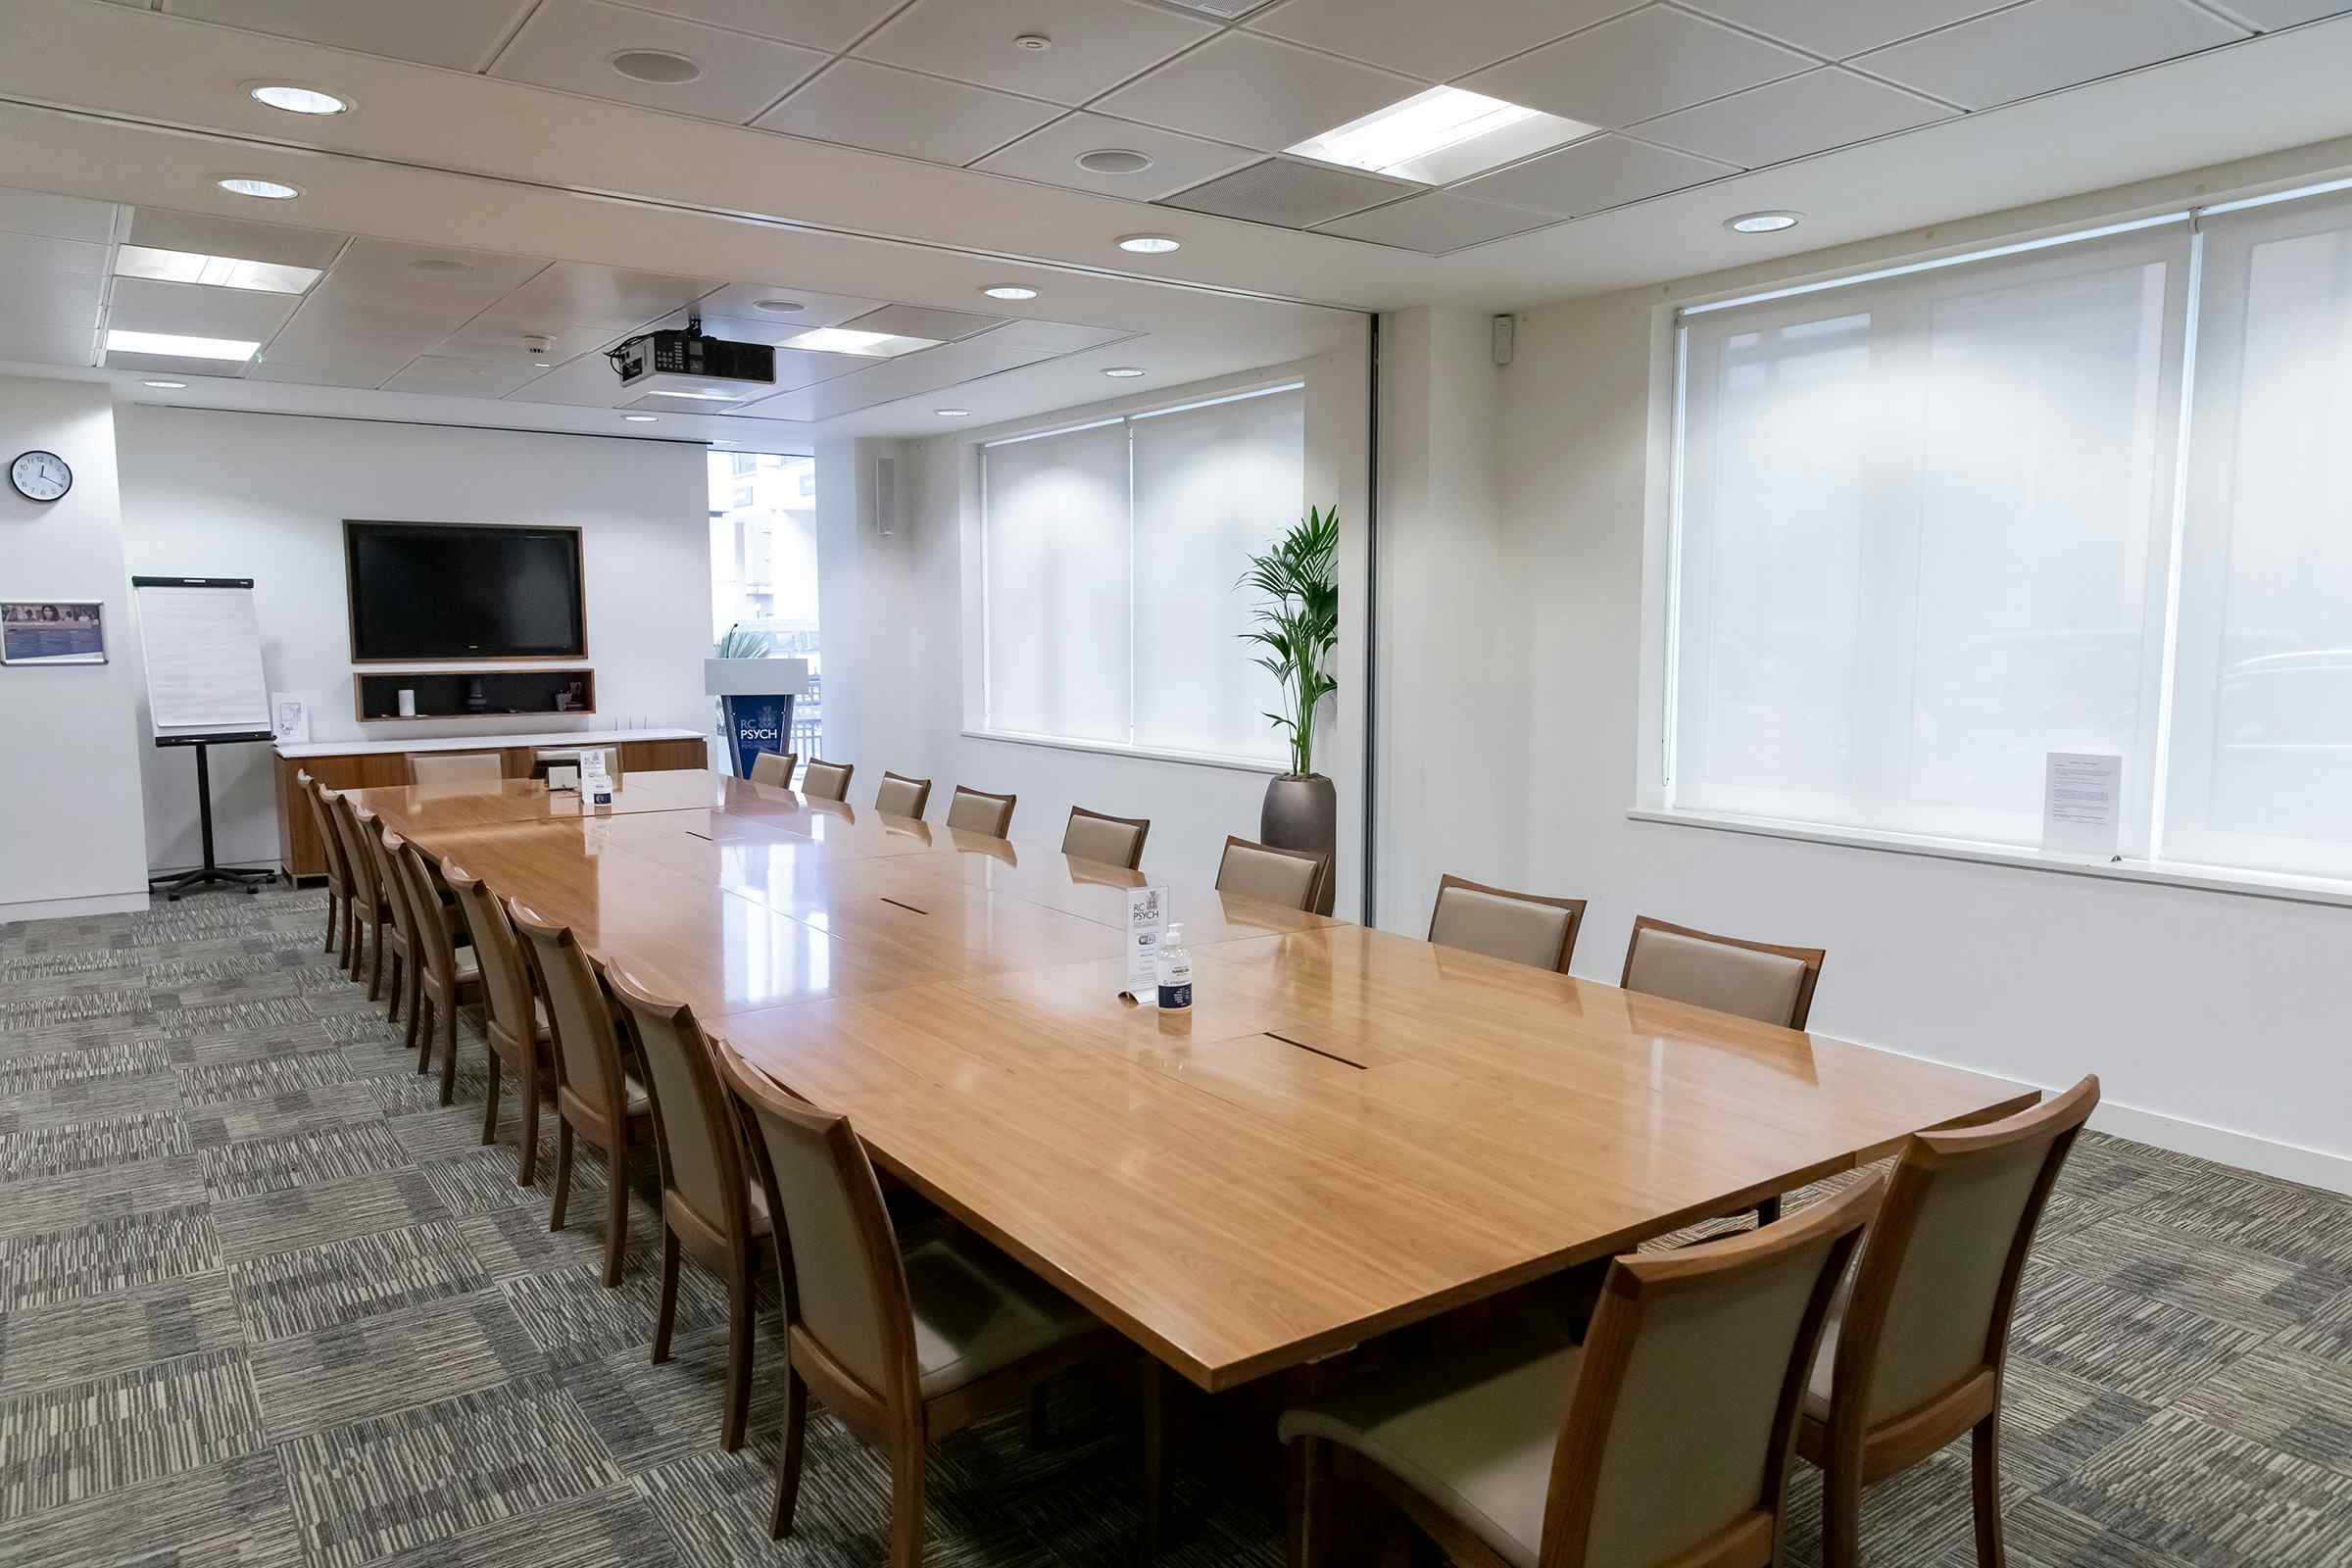 Meeting Room 1 - 4 , Royal College of Psychiatrists